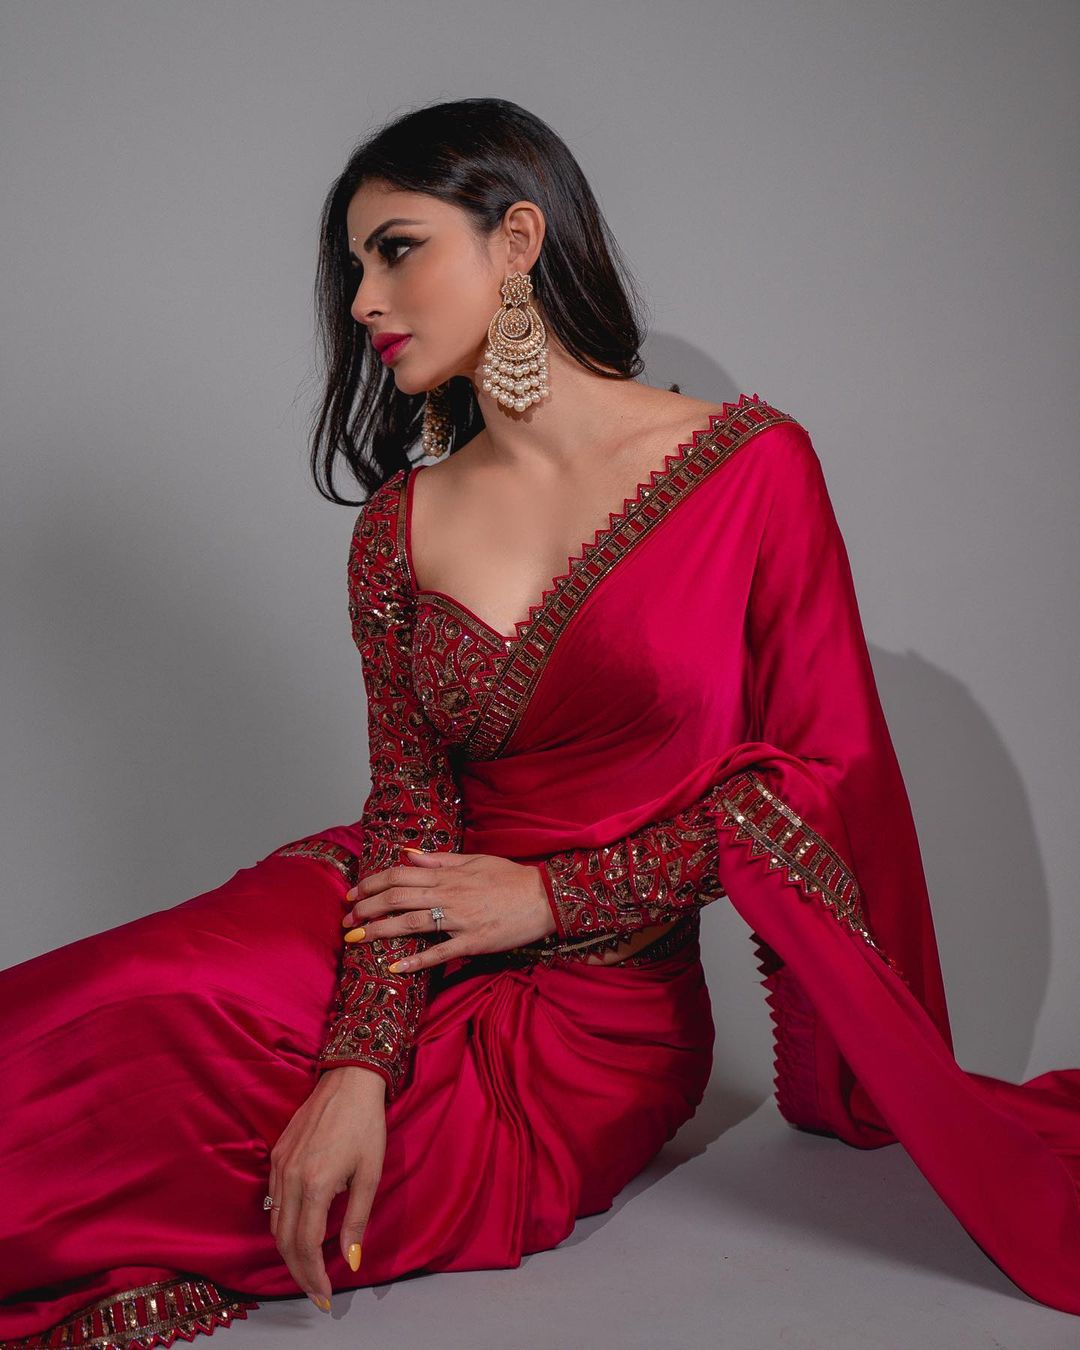 Why Every Woman Should Own a Satin Saree: The Ultimate Style Statement